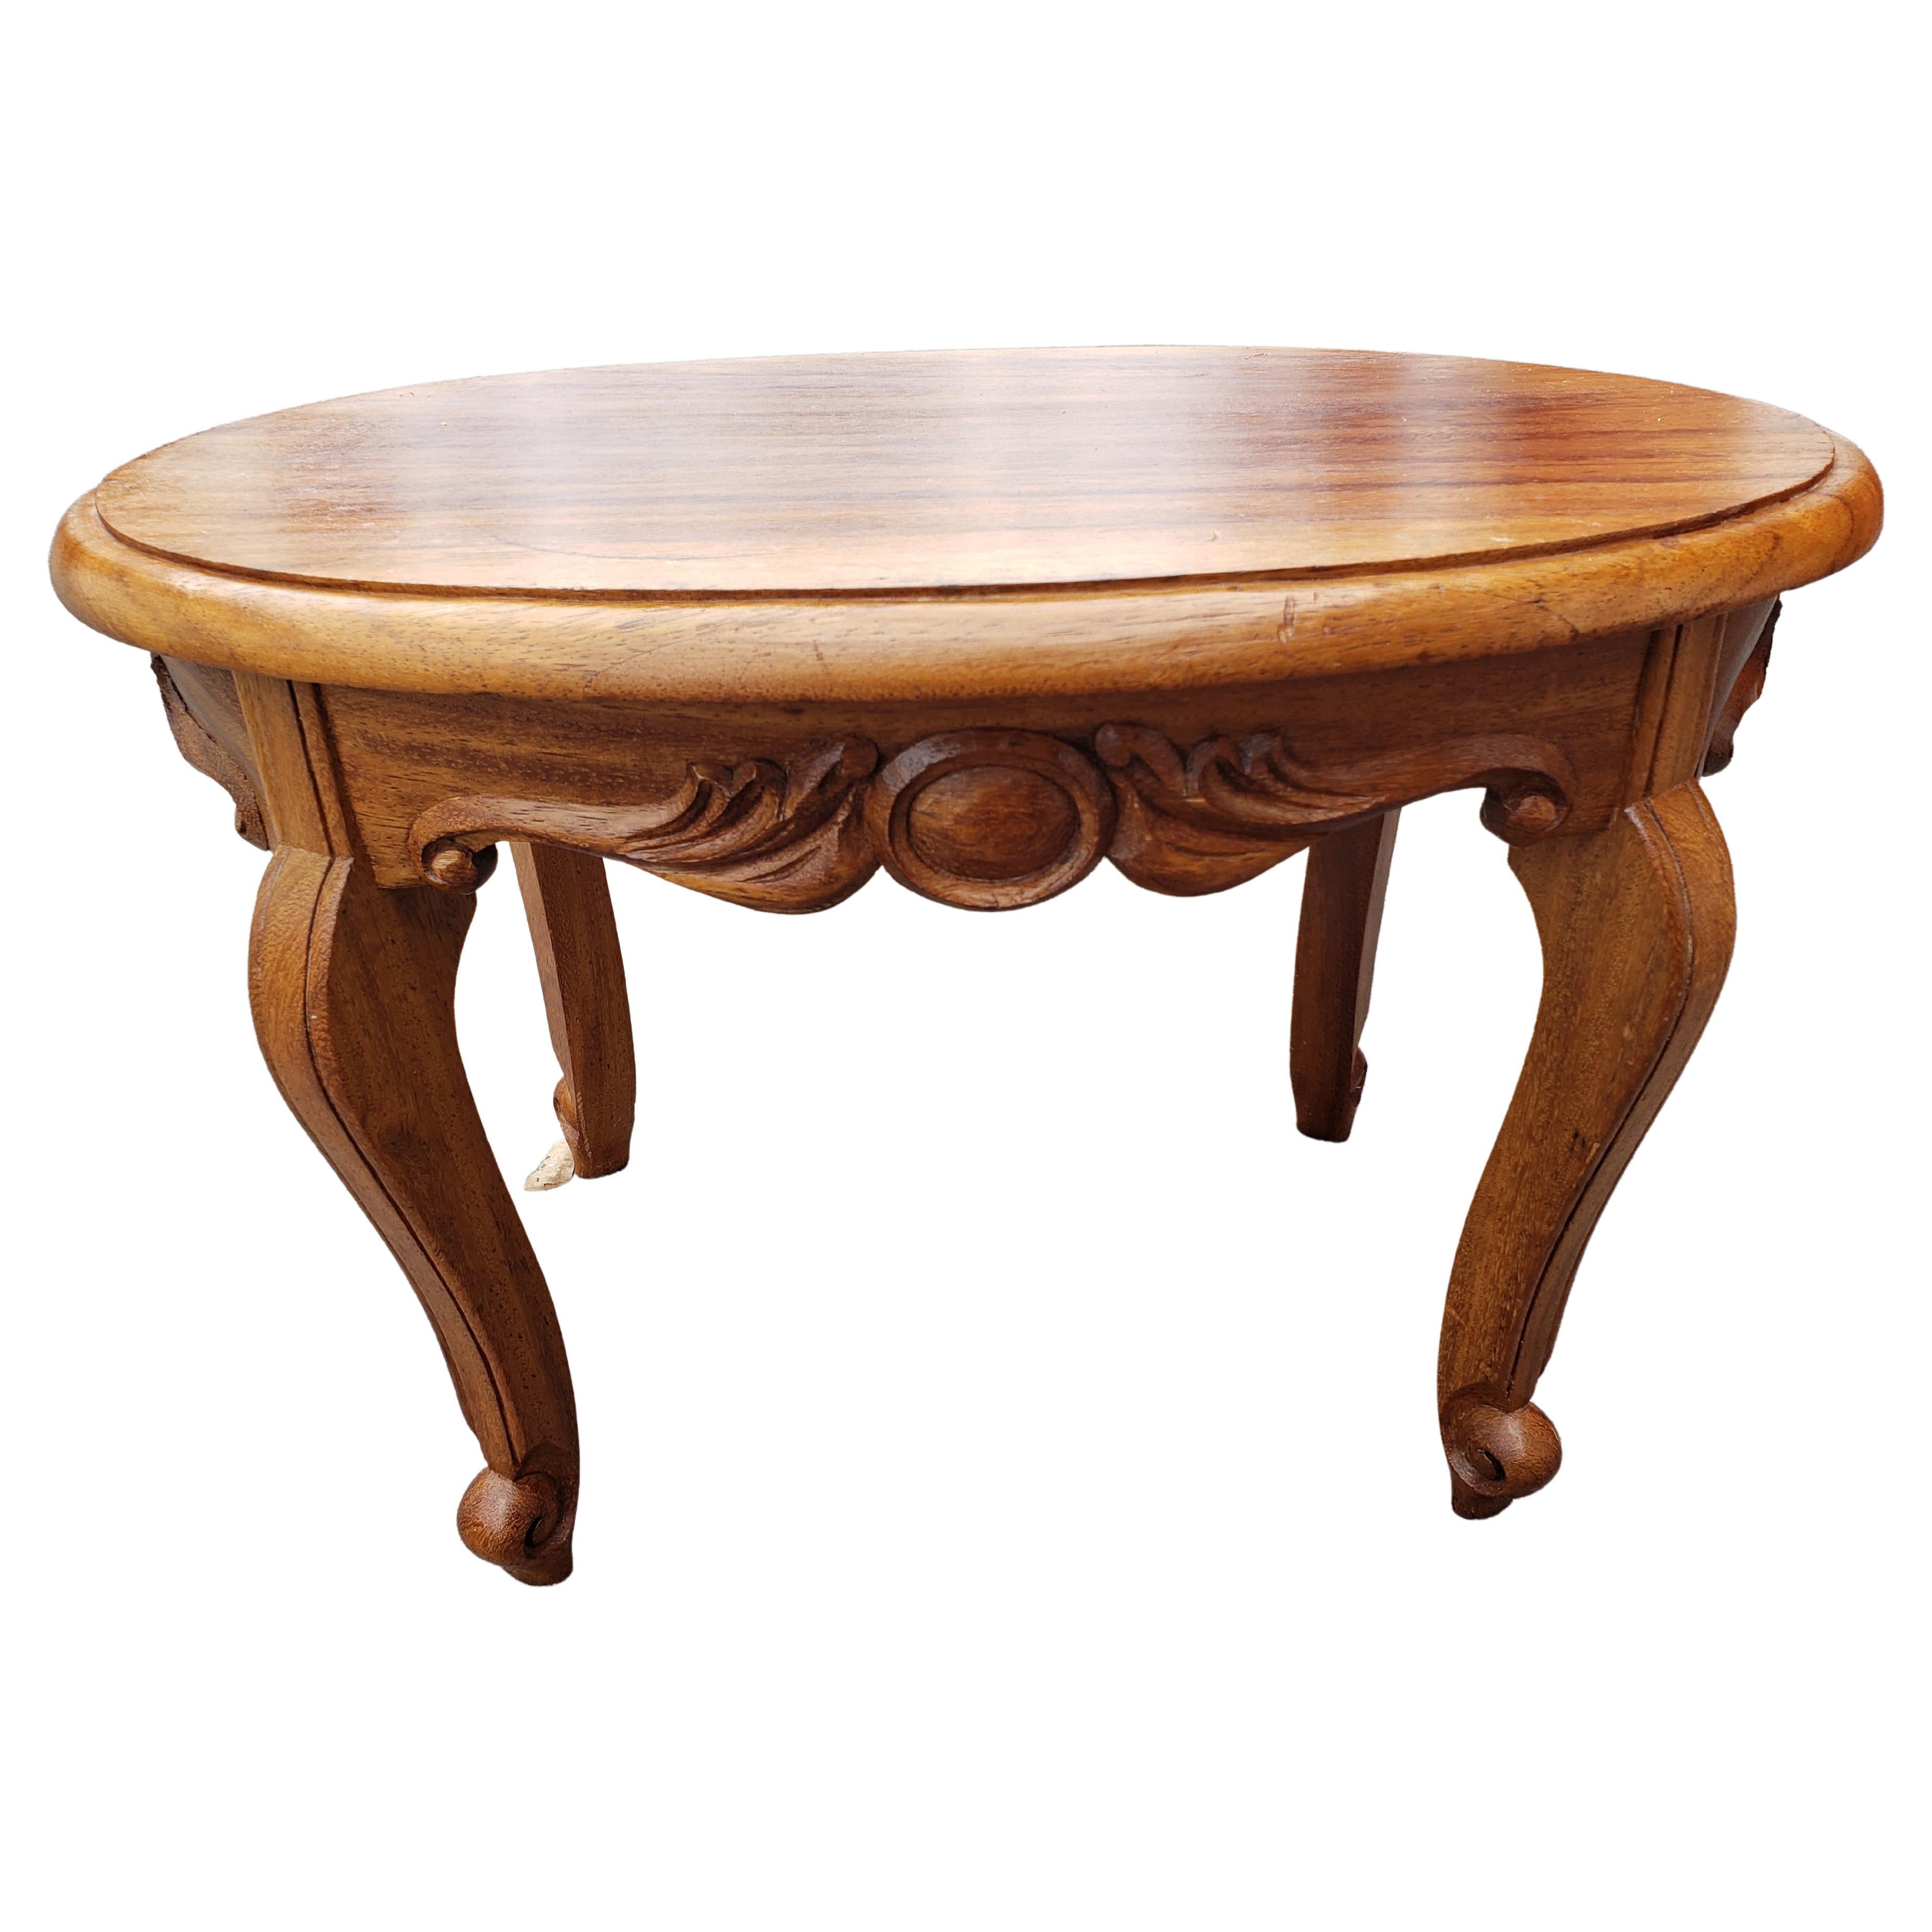 Amish Hand Crafted Solid Oval Red Oak Wood Desert Table Side Table, Circa 1970s For Sale